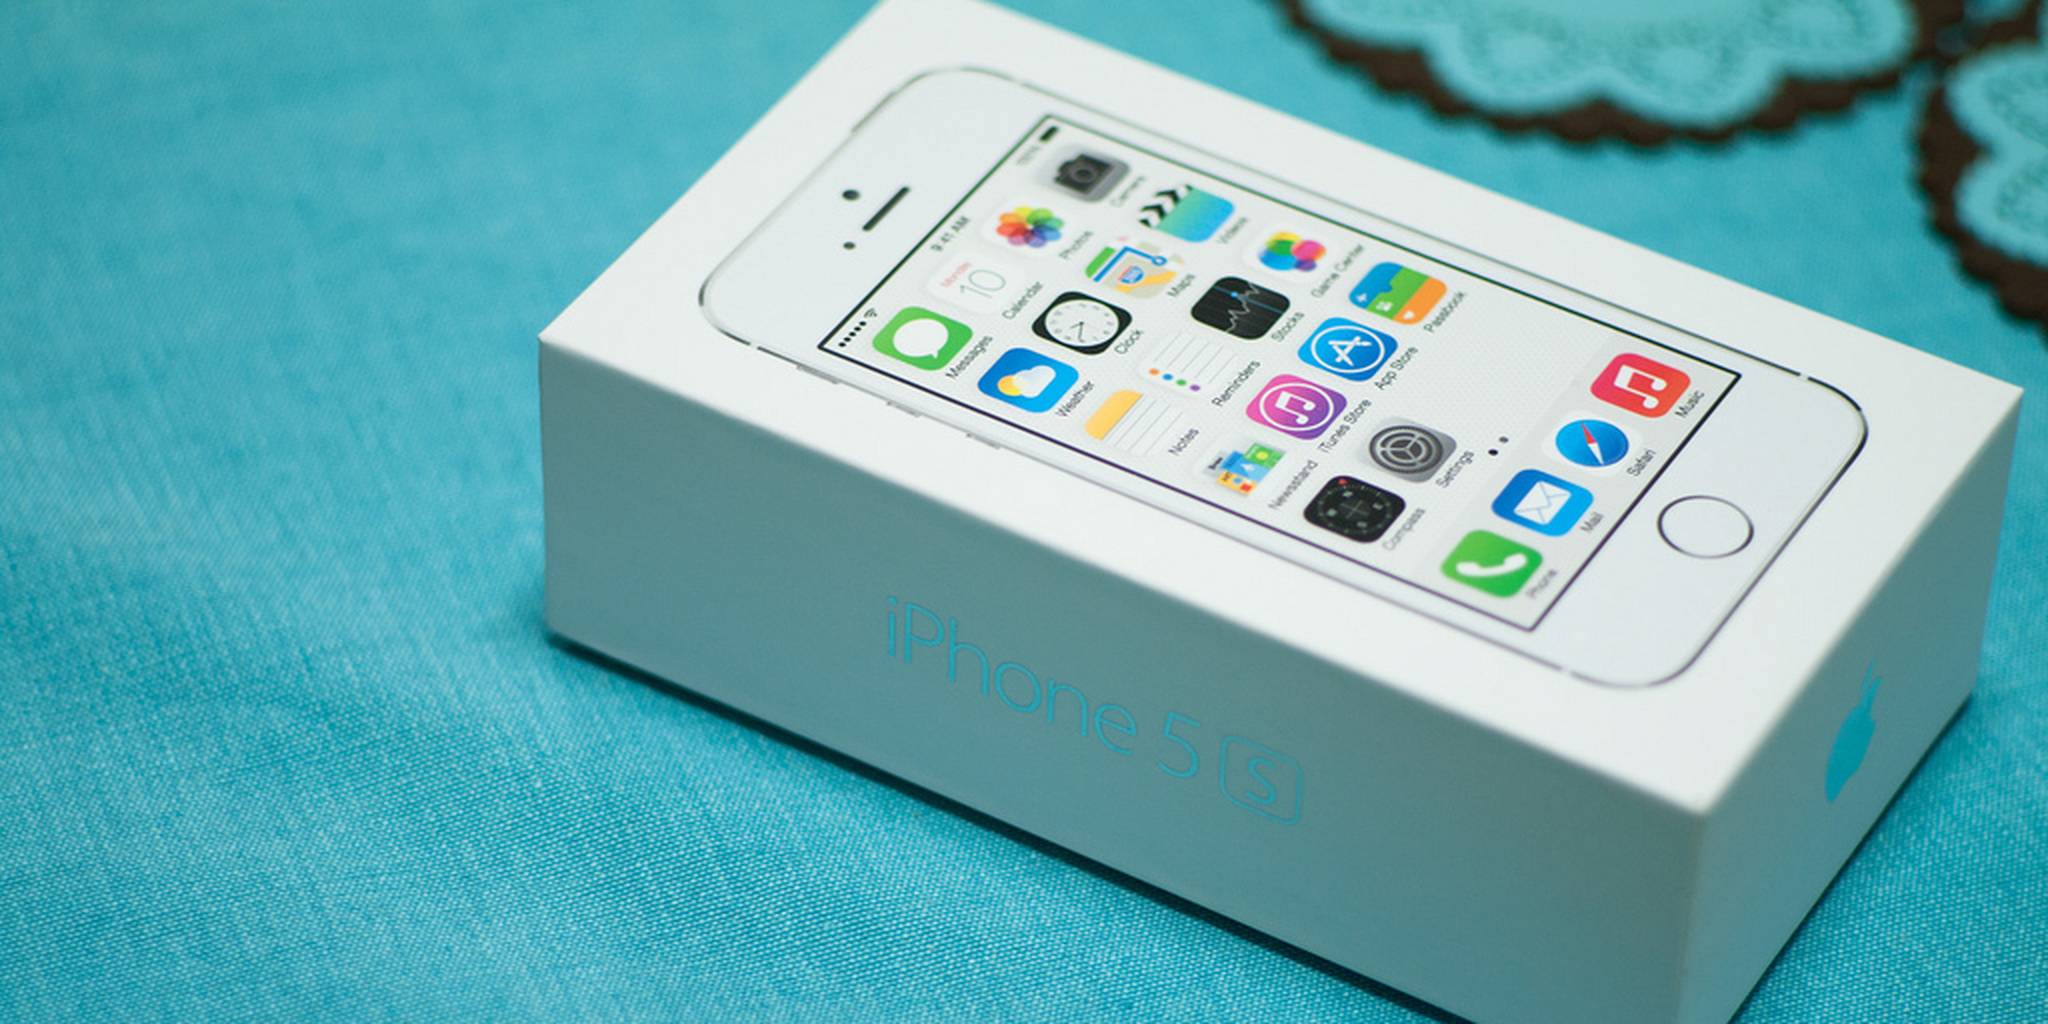 iPhone 5S in the box